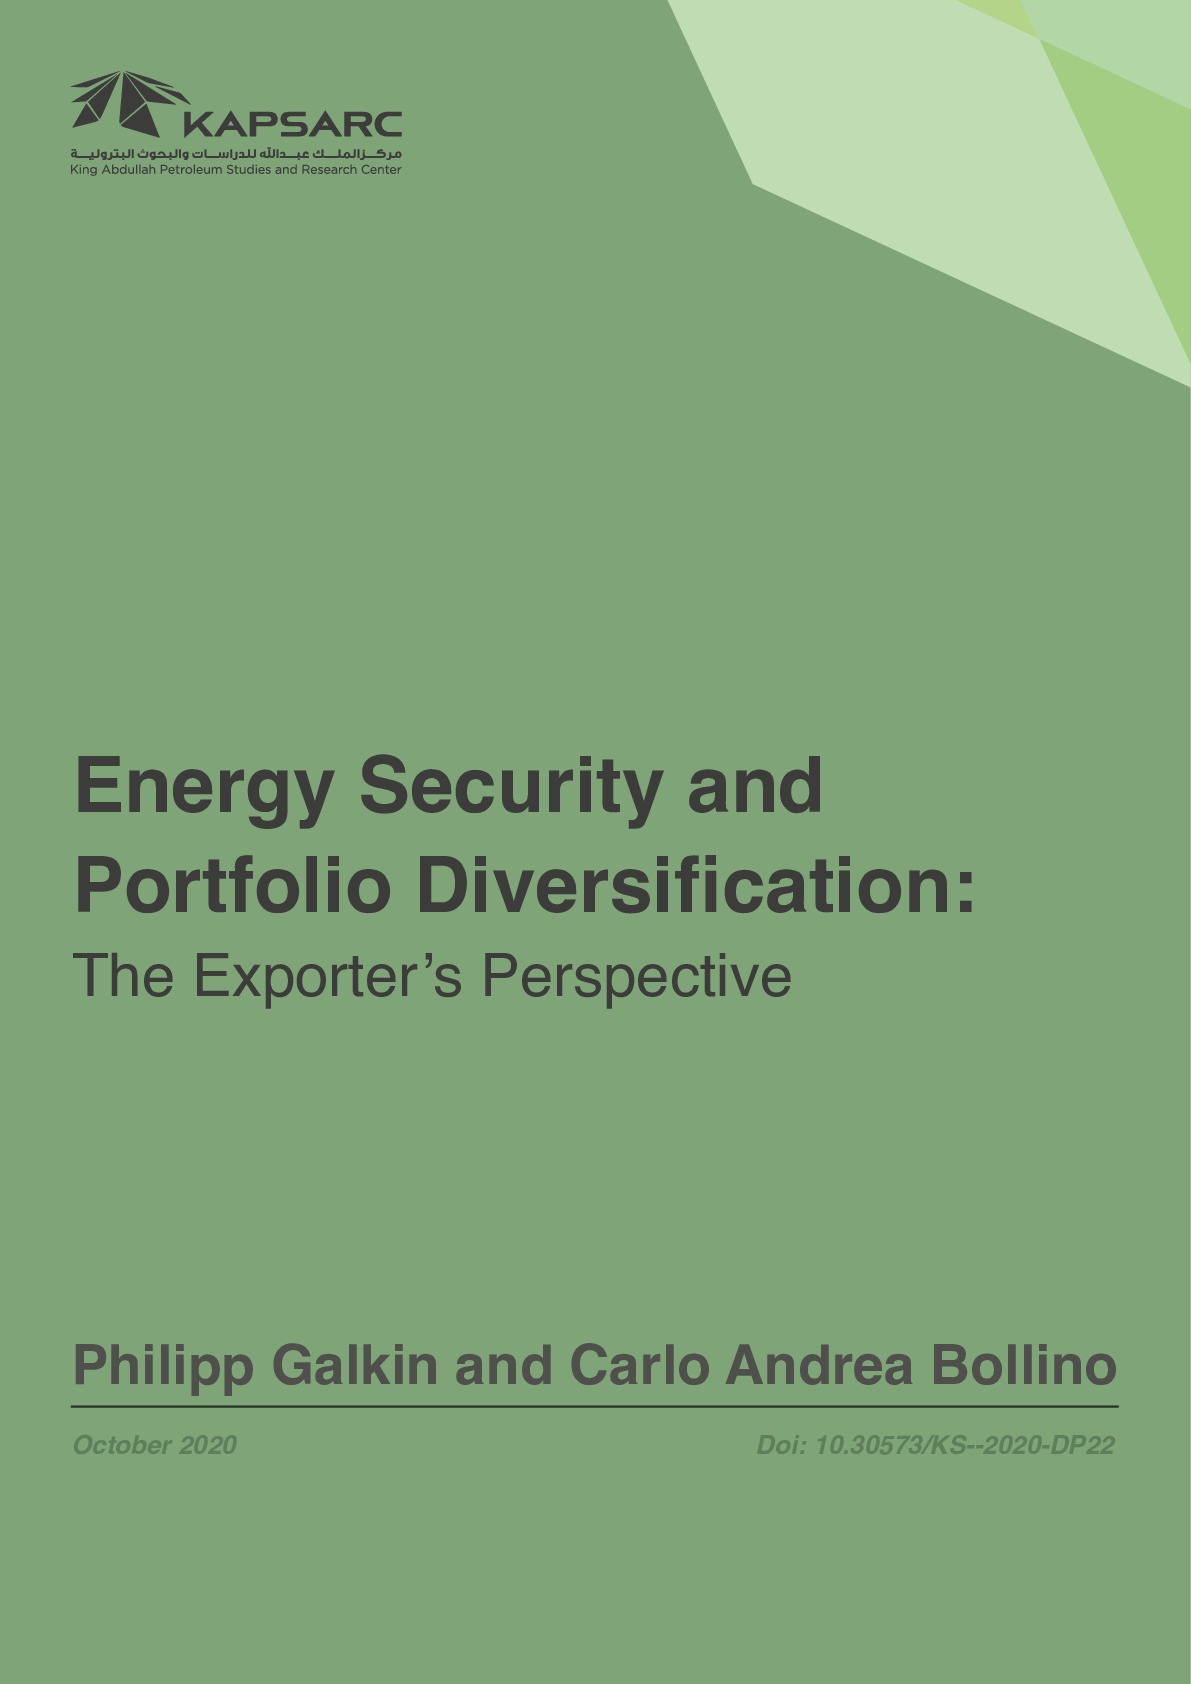 Energy Security and Portfolio Diversification: The Exporter’s Perspective